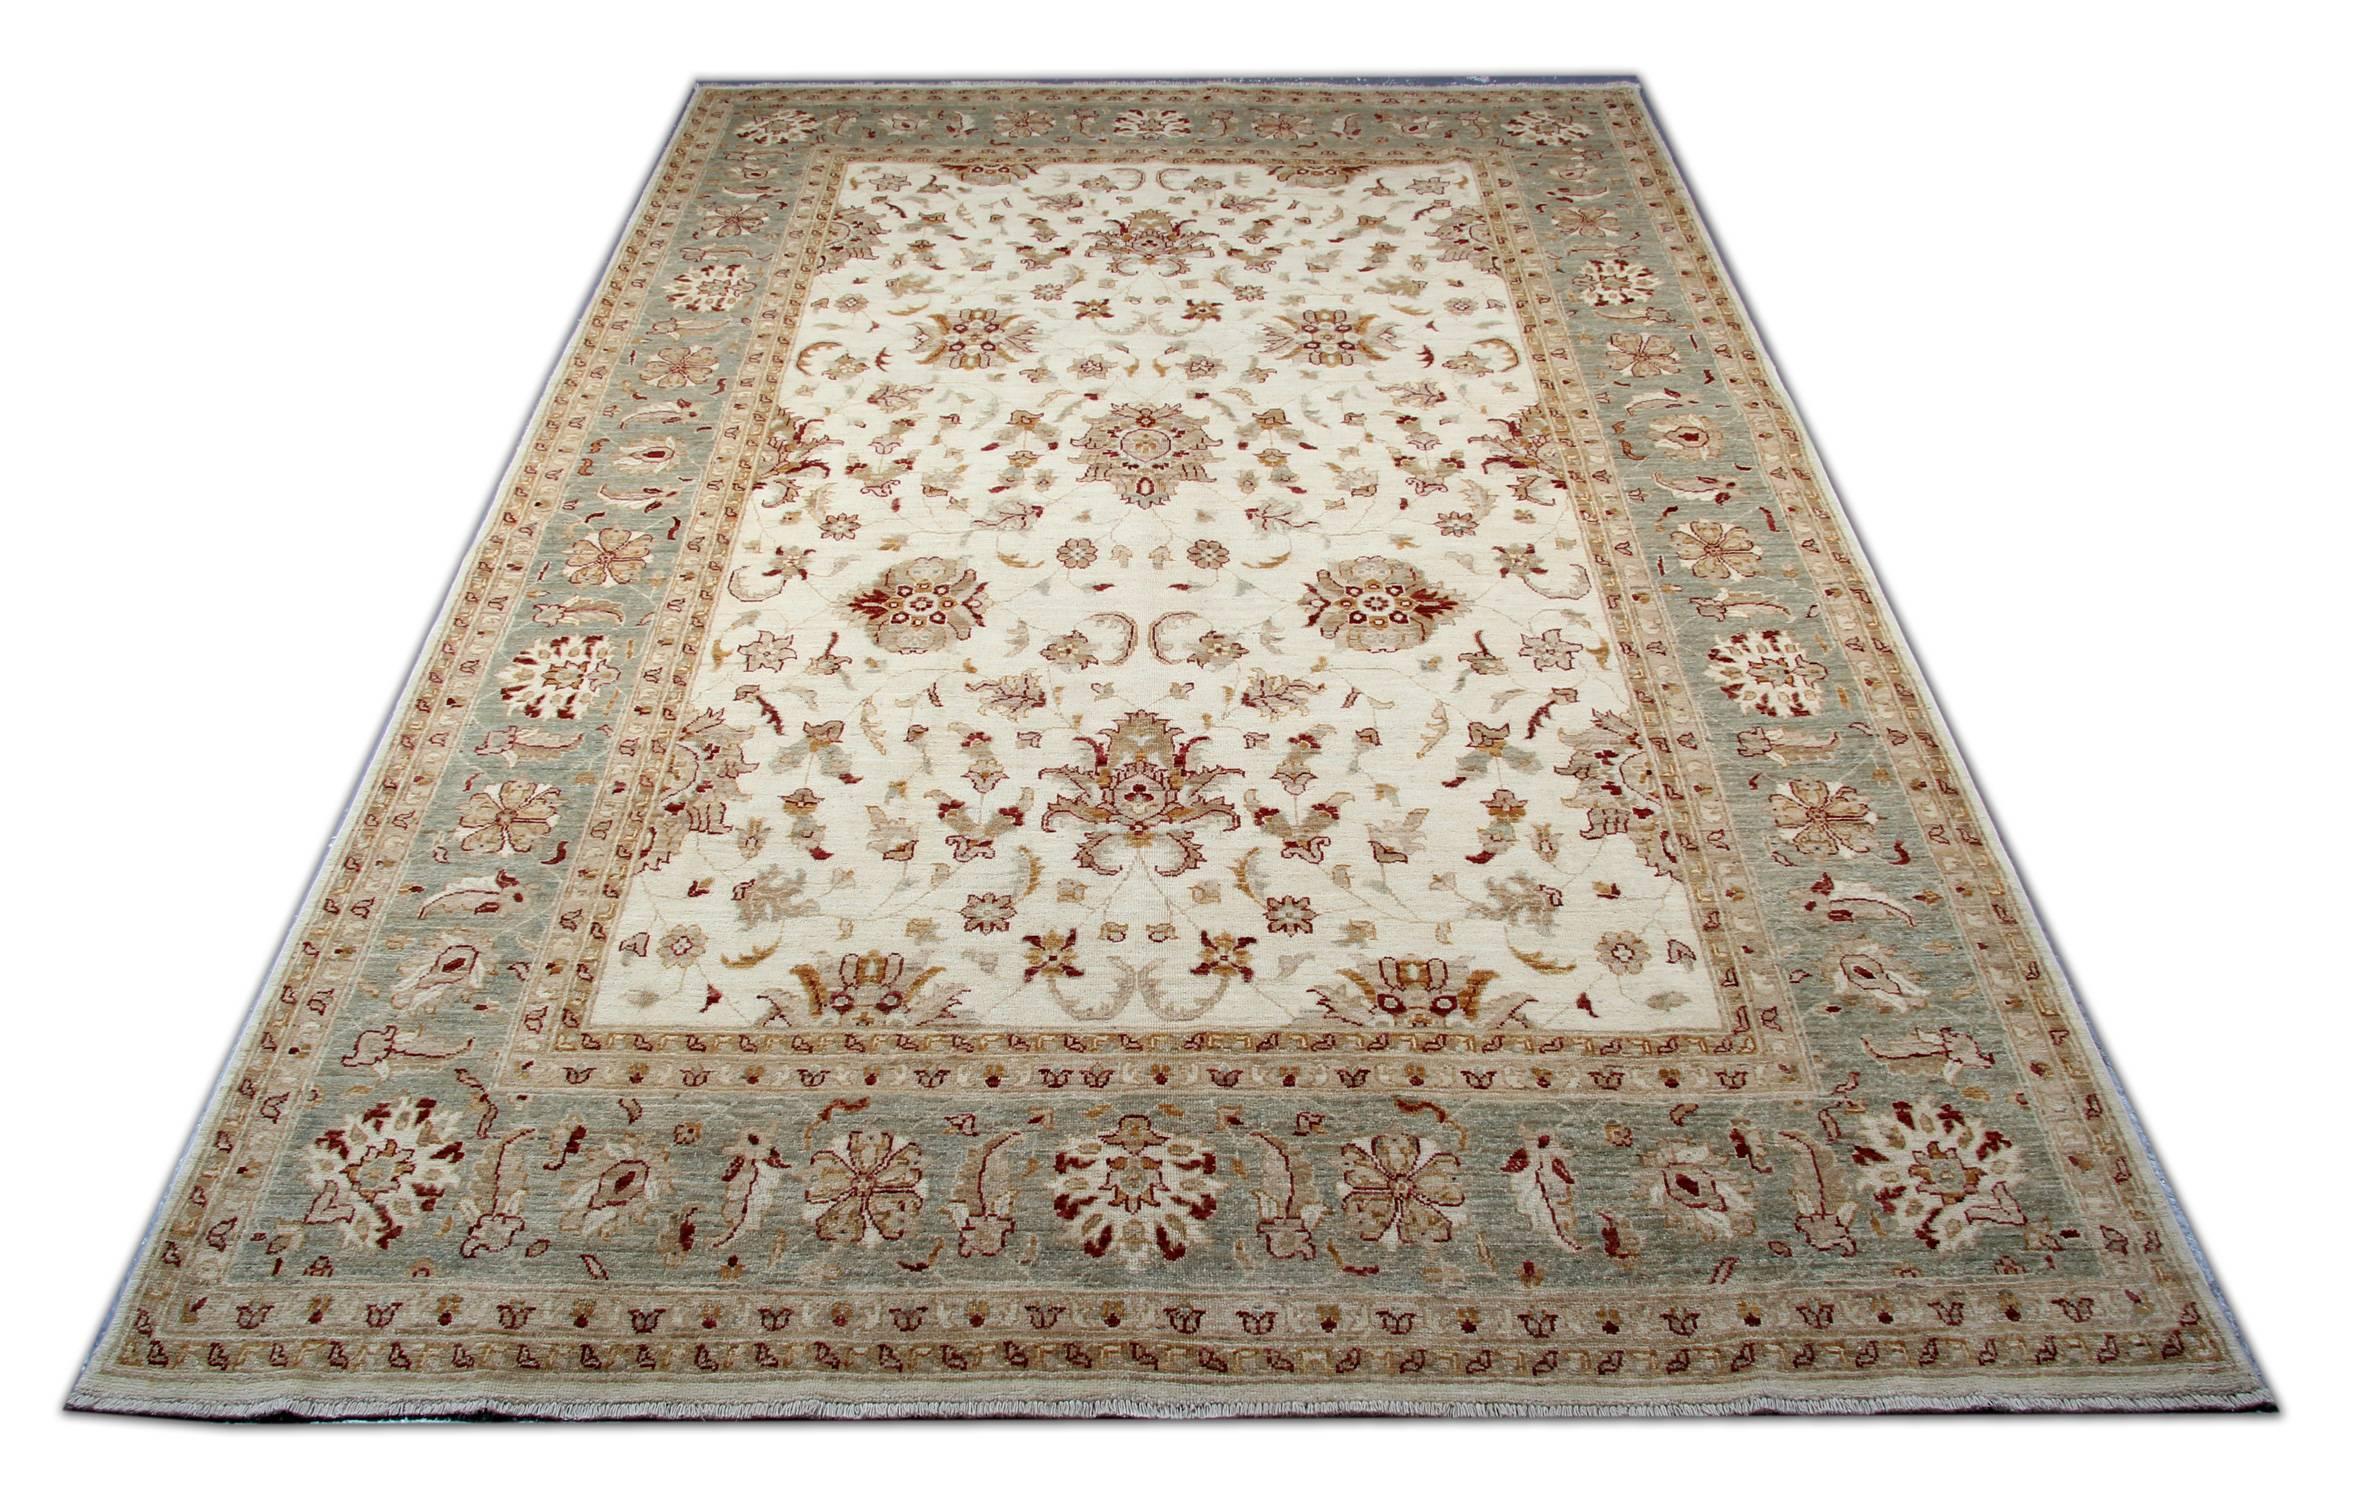 This is traditional rugs kind of our luxury rugs made of own looms by our master weavers of Afghan rugs, This cream rug is made with organic vegetable dyes all handspun wool rugs. This carpet rug is kind of patterned rugs all-over floral rugs design